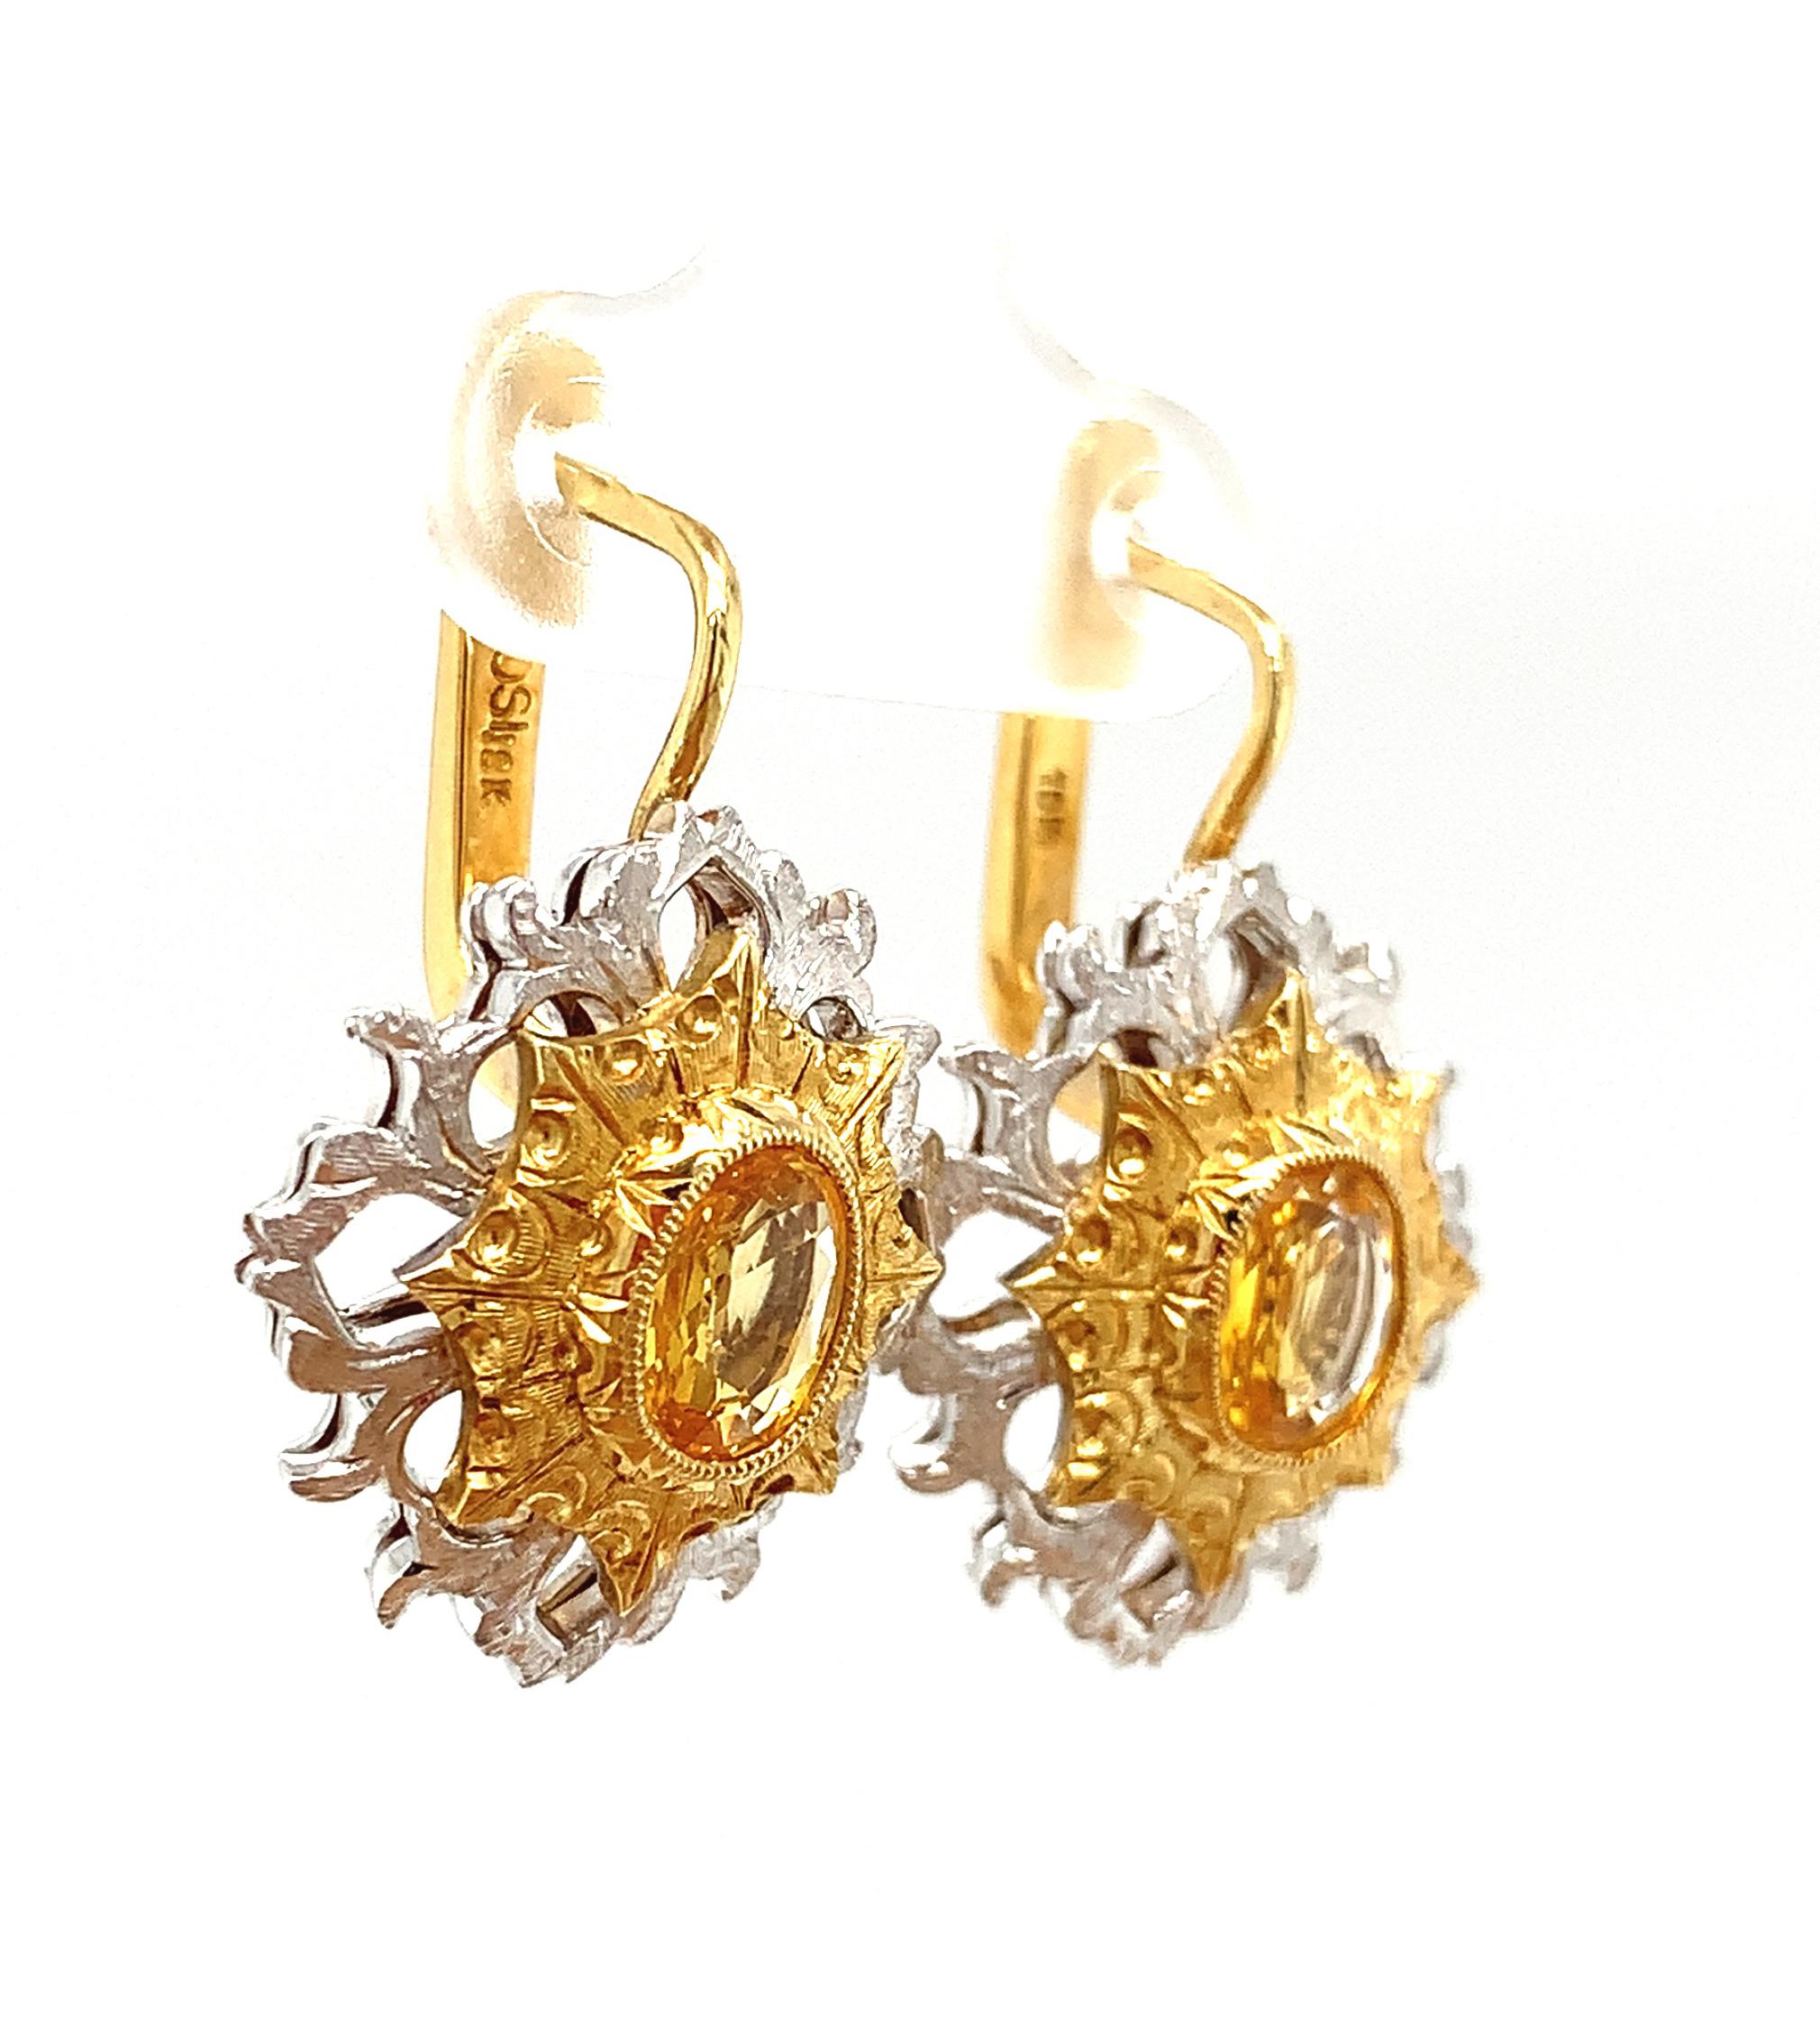 Yellow Sapphire Drop Earrings in 18K White and Yellow Gold, 1.79 Carat Total In New Condition For Sale In Los Angeles, CA